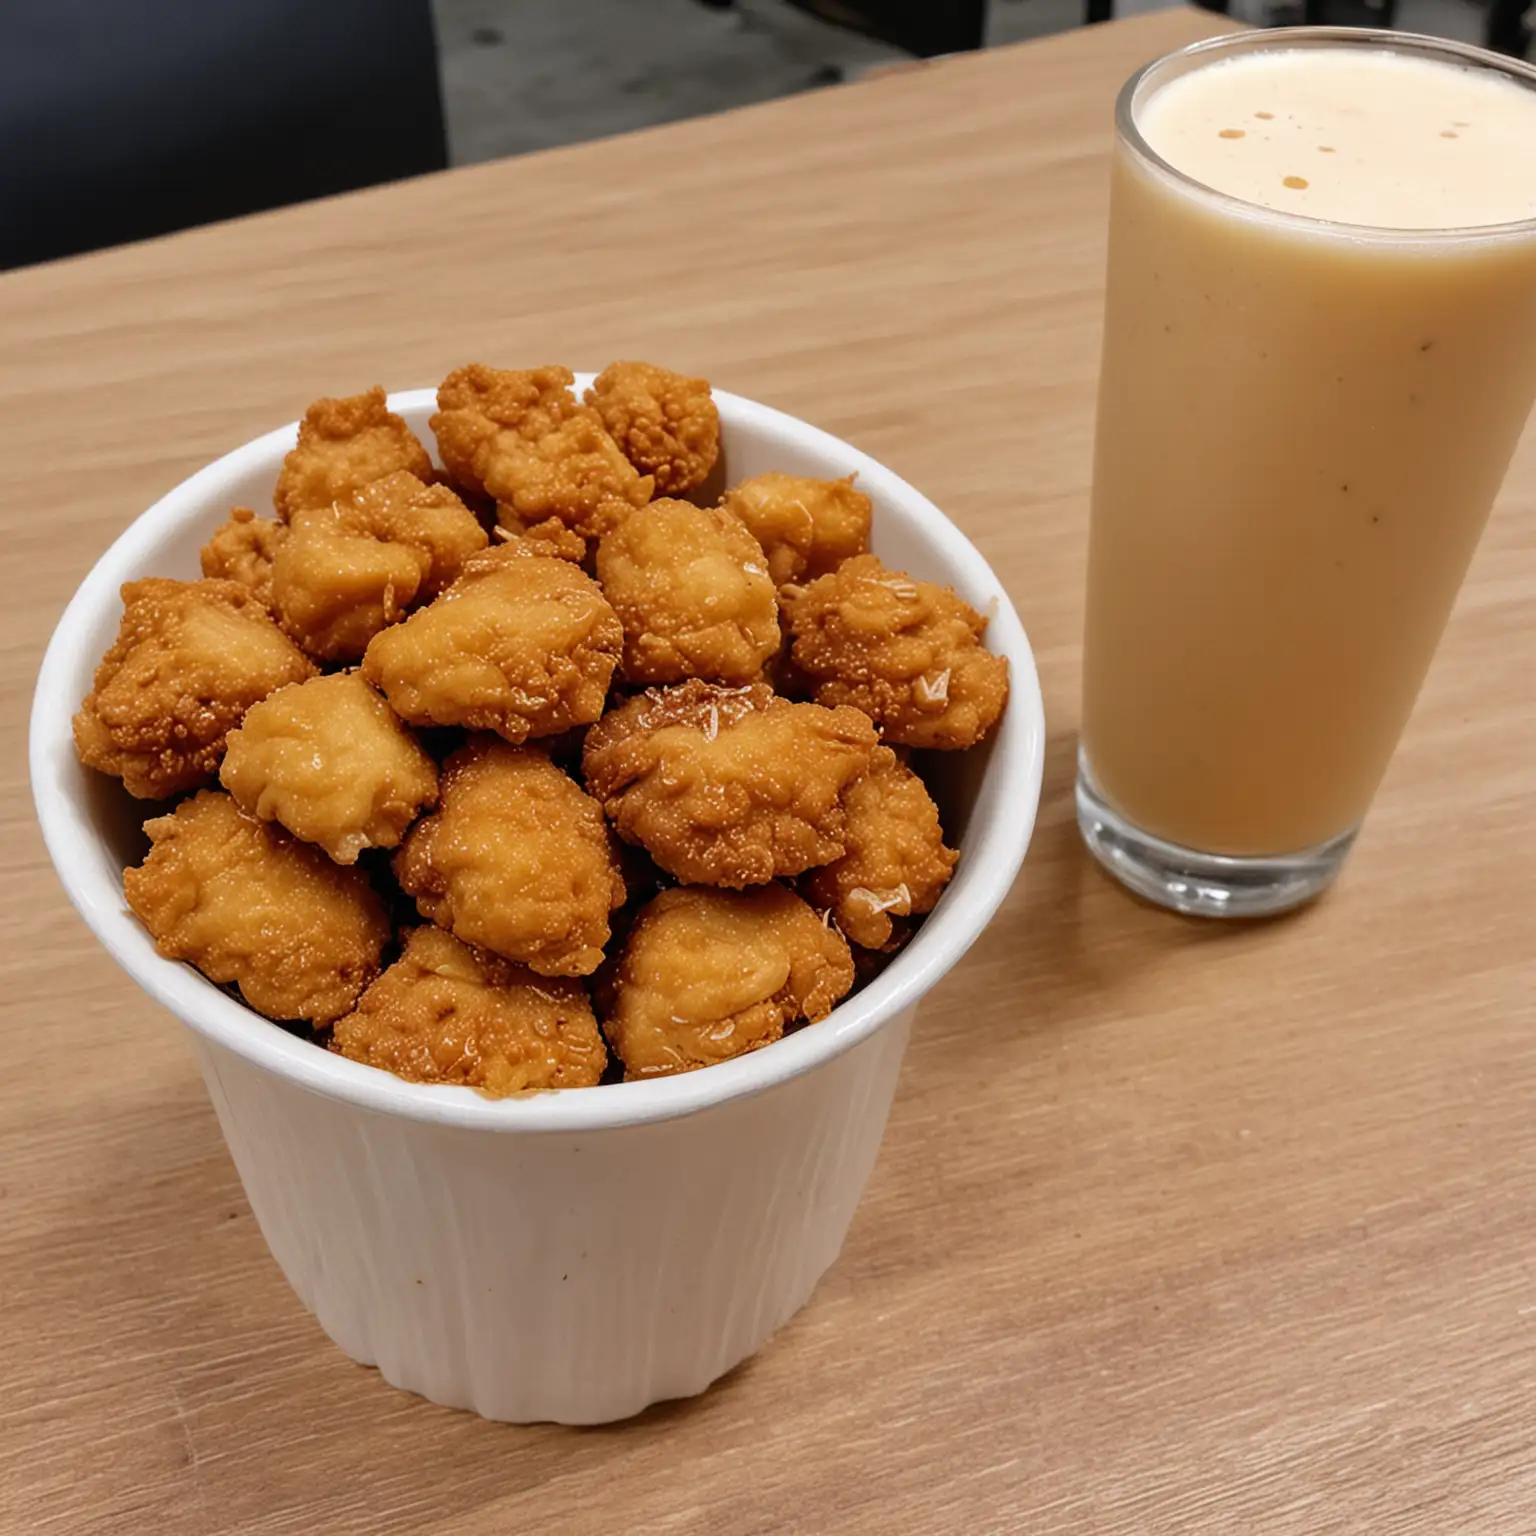 Crispy Chicken Chunks with Milk Tea Delicious Fried Chicken and Refreshing Beverage Pairing